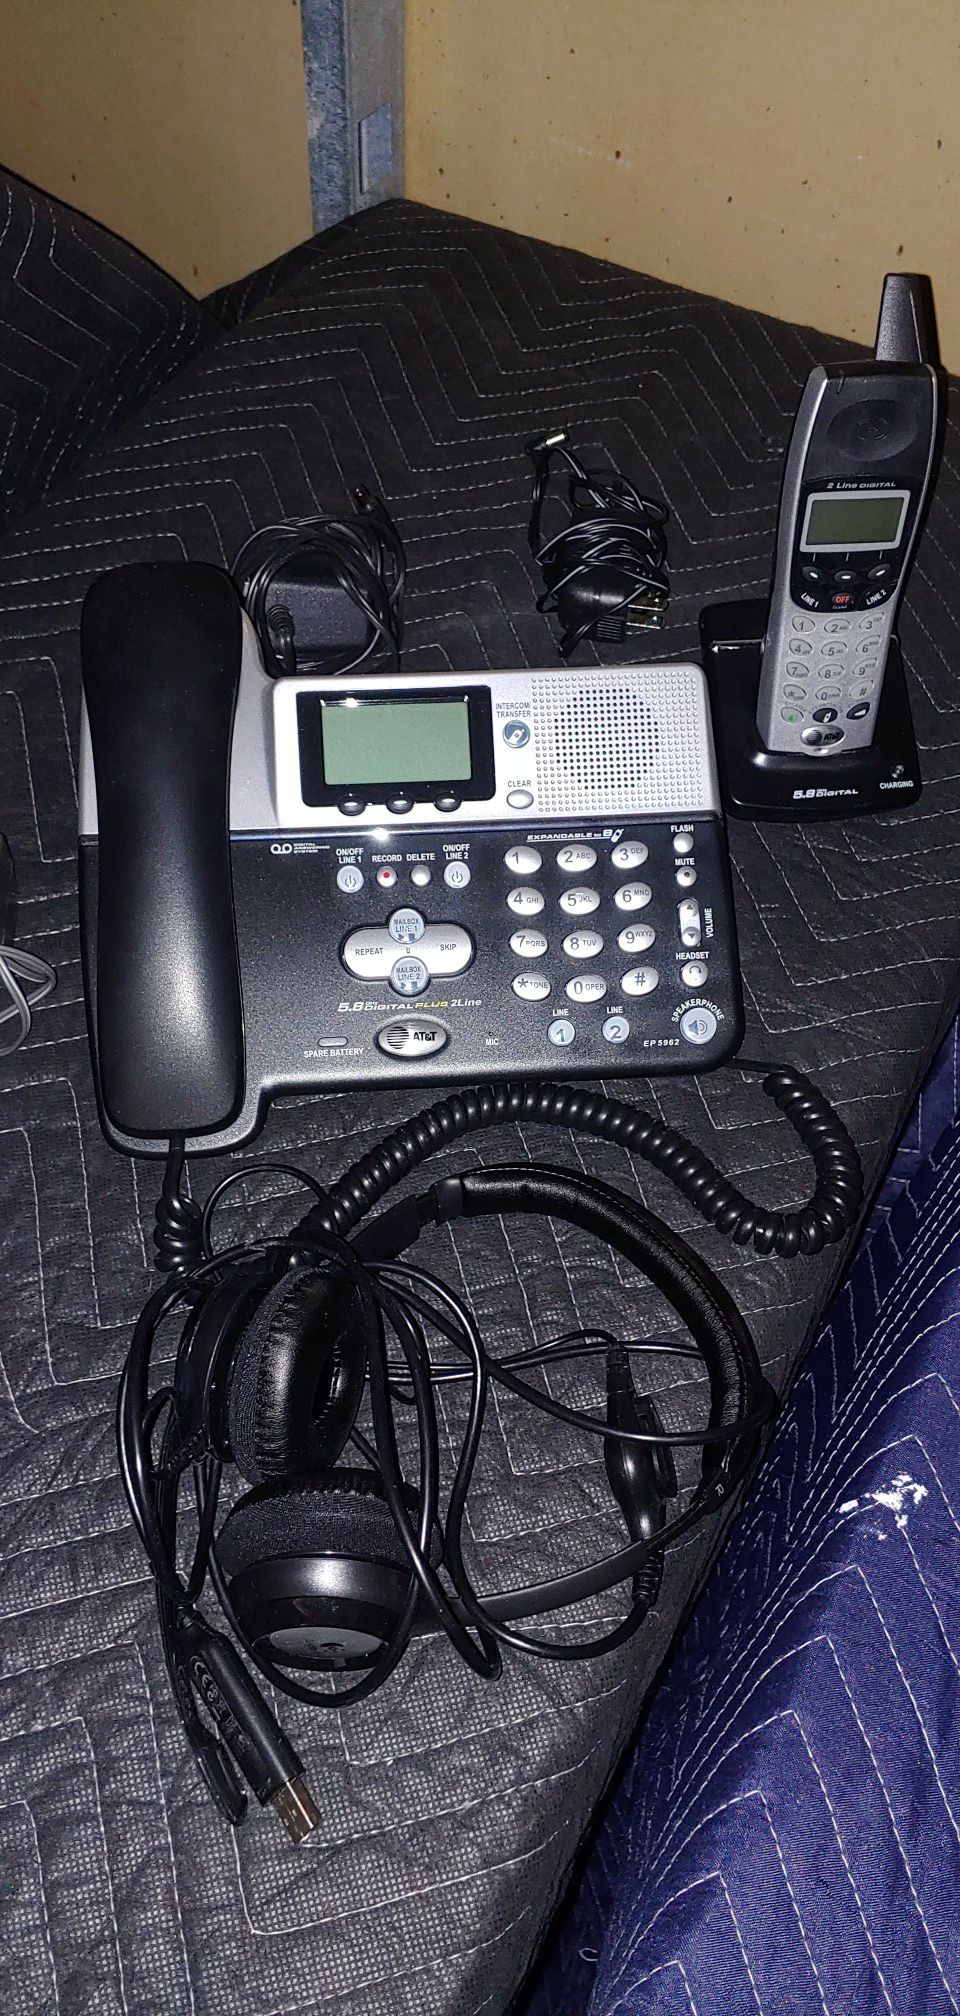 AT&T phone system model# EP5962 - 2 lines. With headset and mic.